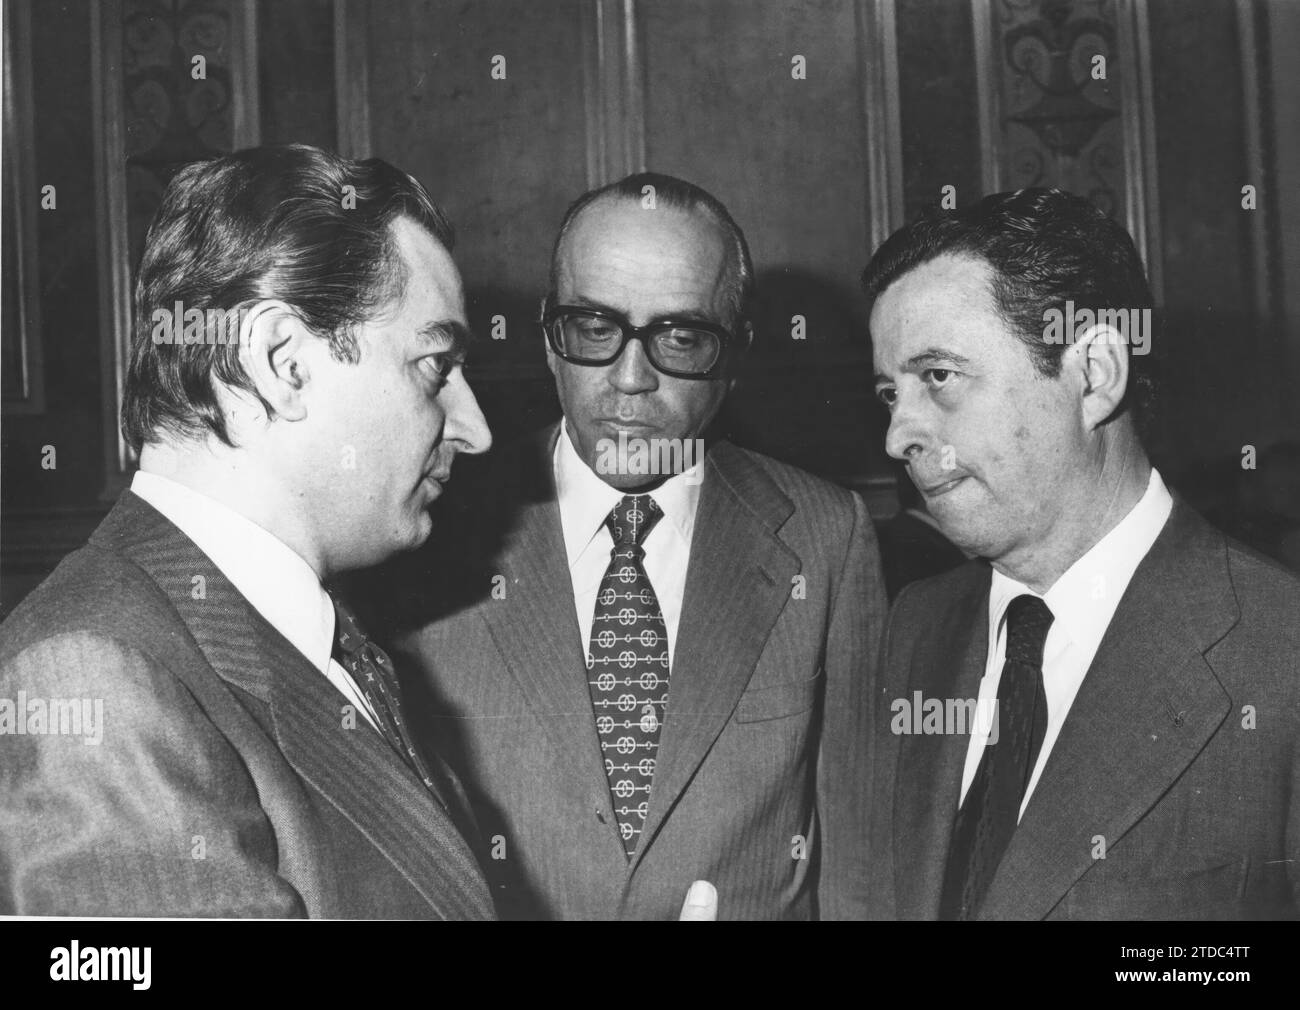 03/16/1981. Plenary session of the congress began yesterday afternoon, behind closed doors, with the report of the minister of defense on the attempted coup d'état of February 23. Mr. Calvo-Sotelo talks with the head of the Chamber, Mr. Lavilla, and with the Minister of Defense, Mr. Oliart, at the end of this first part of the plenary session. Credit: Album / Archivo ABC / Teodoro Naranjo Domínguez Stock Photo